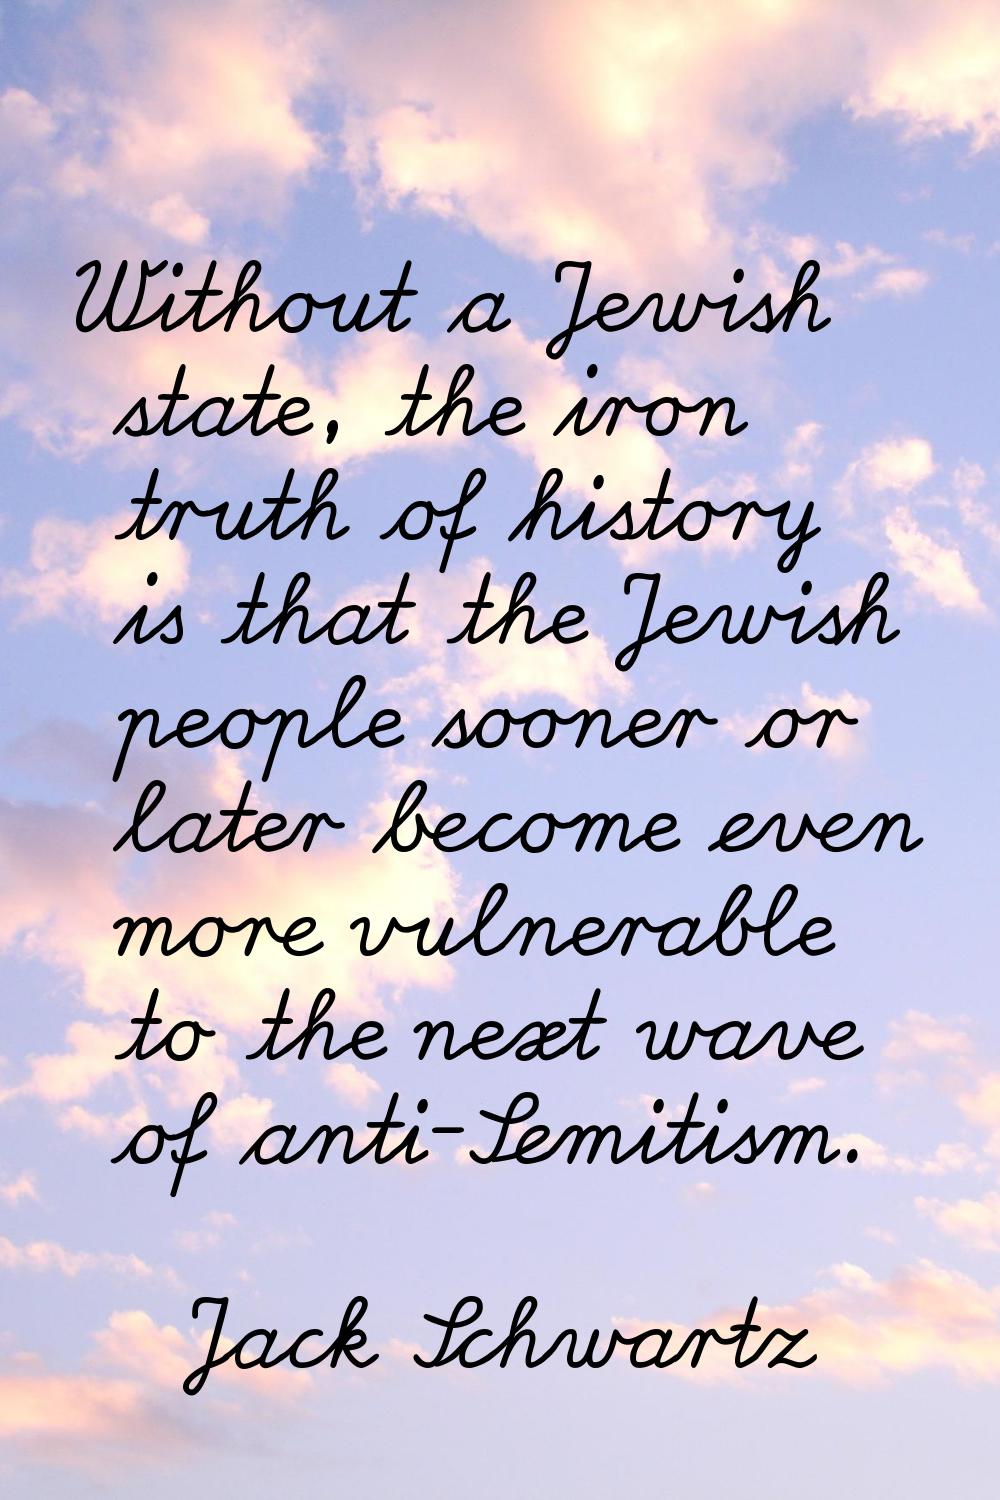 Without a Jewish state, the iron truth of history is that the Jewish people sooner or later become 